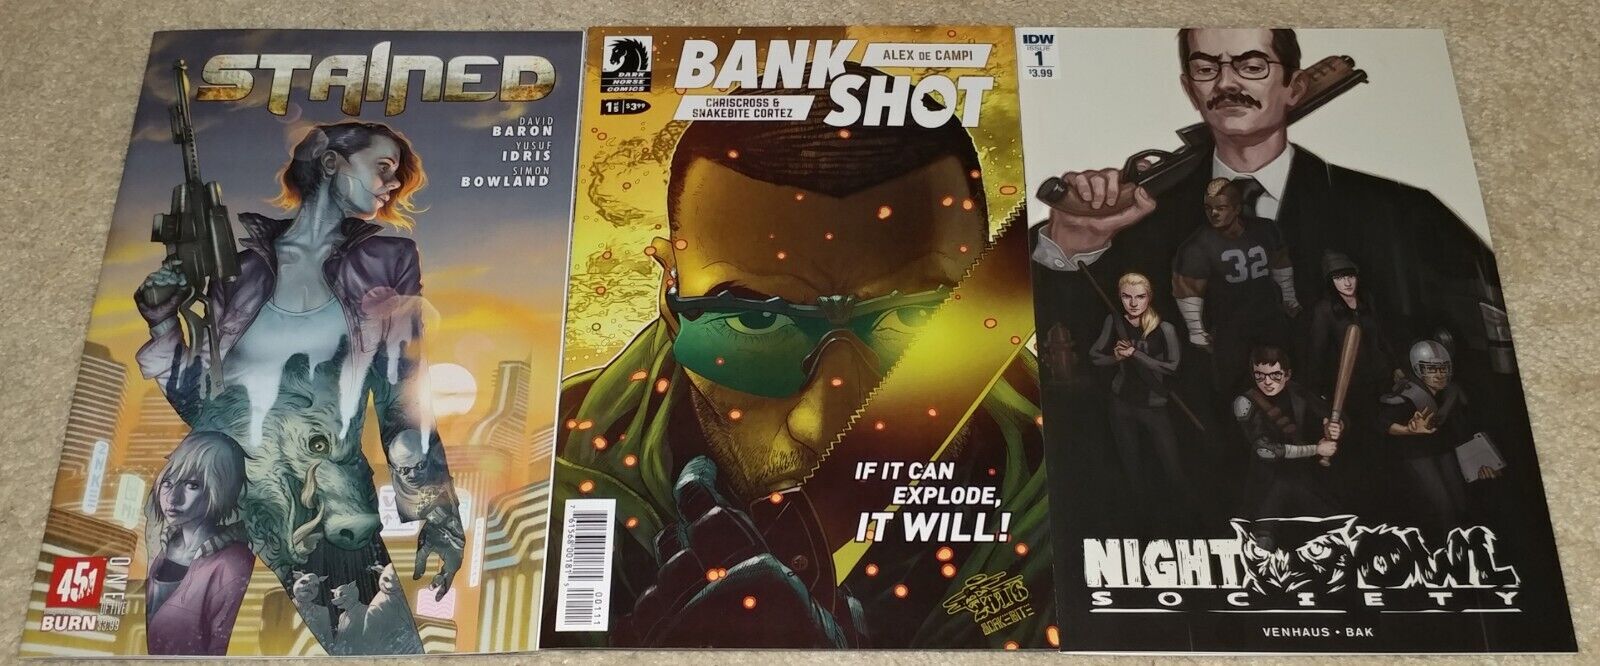 Night Owl Society #1, Stained #1 & Bankshot #1 (3 comics) 451 Media - IDW- NM